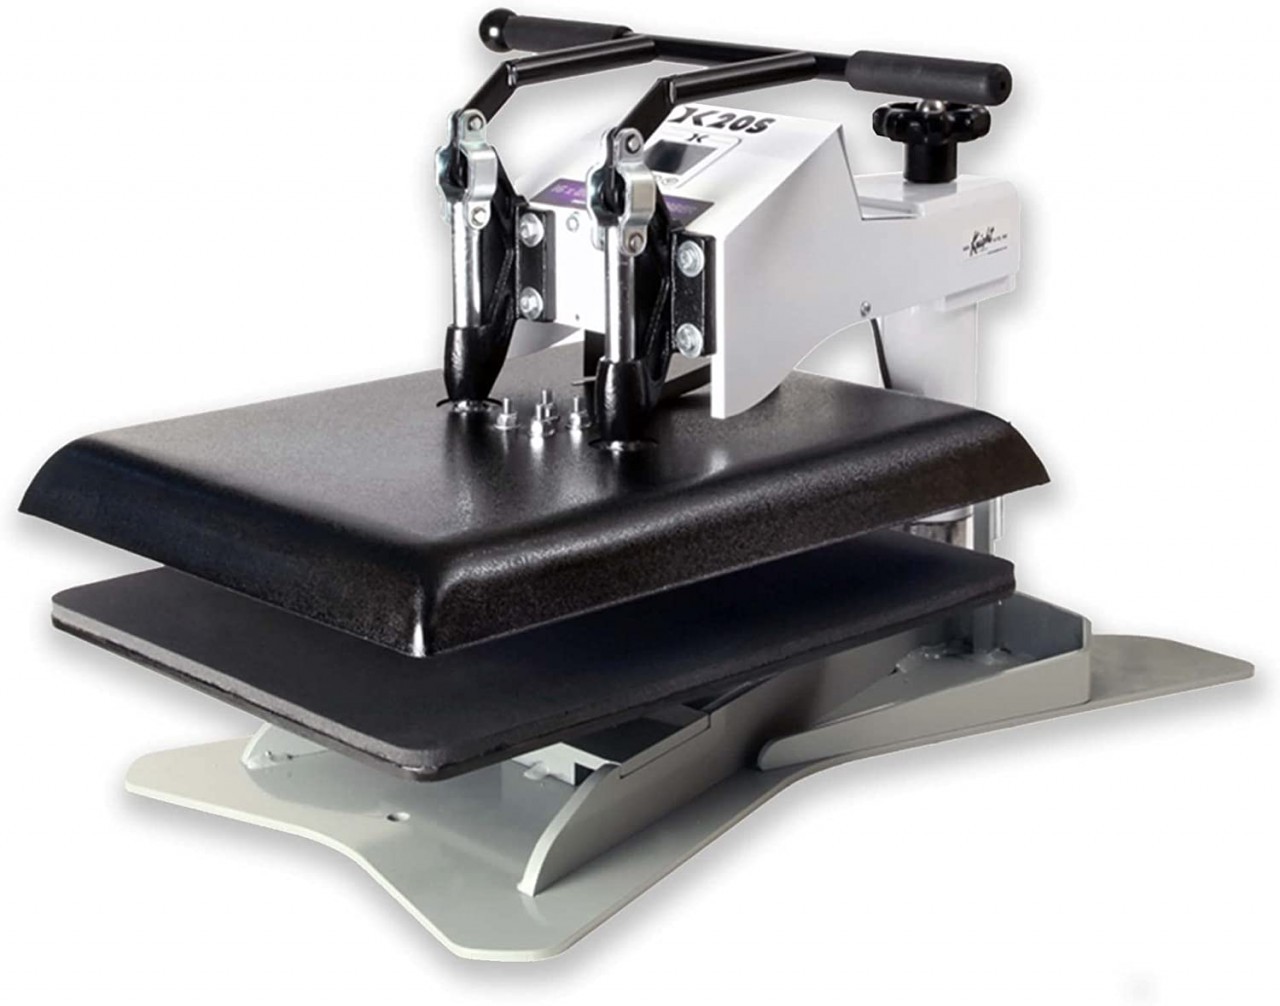 DK20S - The Best Professional Heat Press for Sublimation?